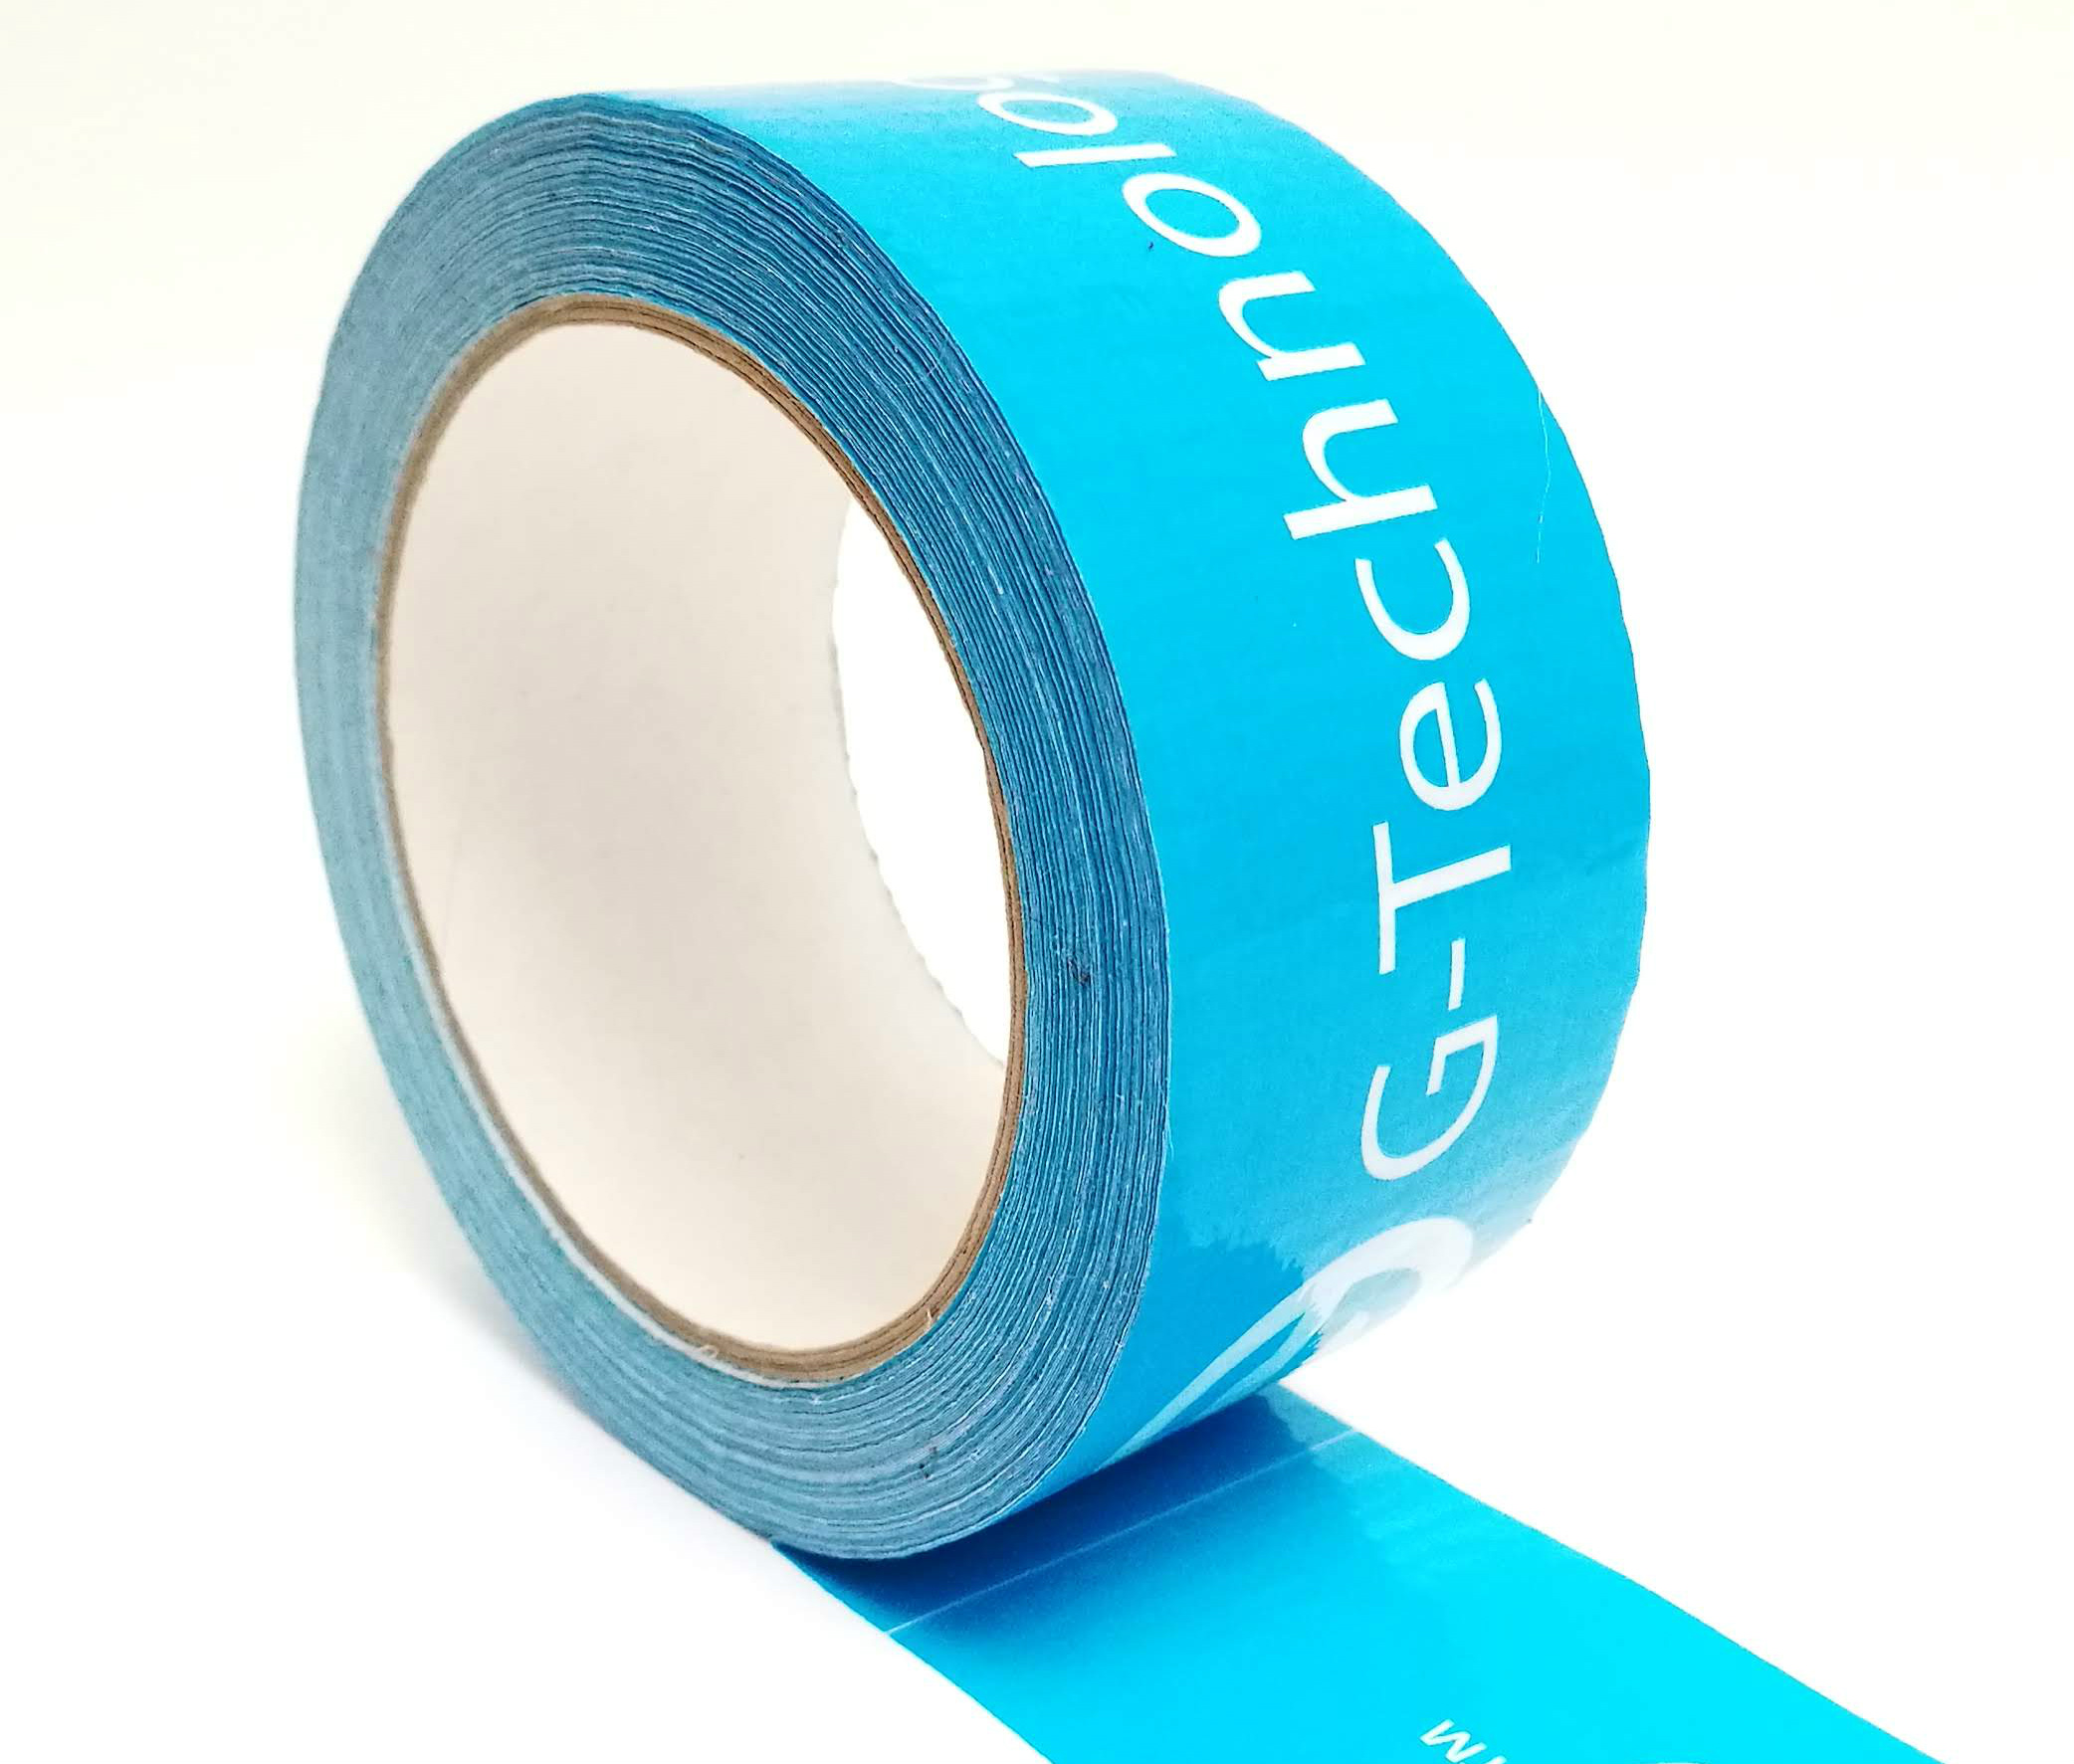 New - Printed textile adhesive tape called Duct tape or duck tape